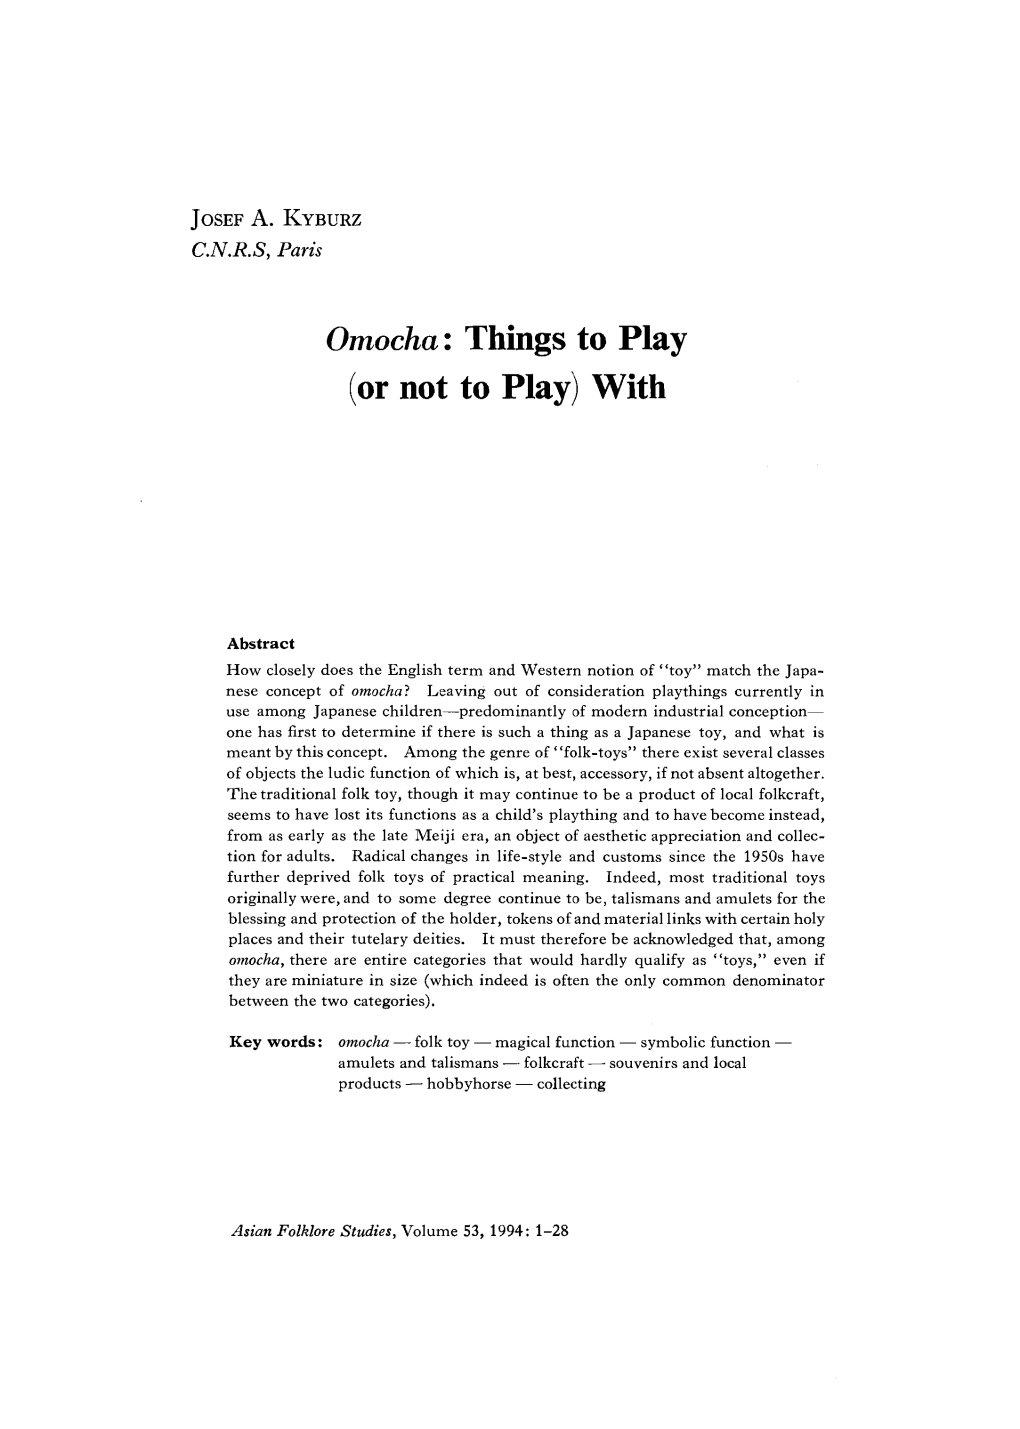 Omocha: Things to Play (Or Not to Play) With